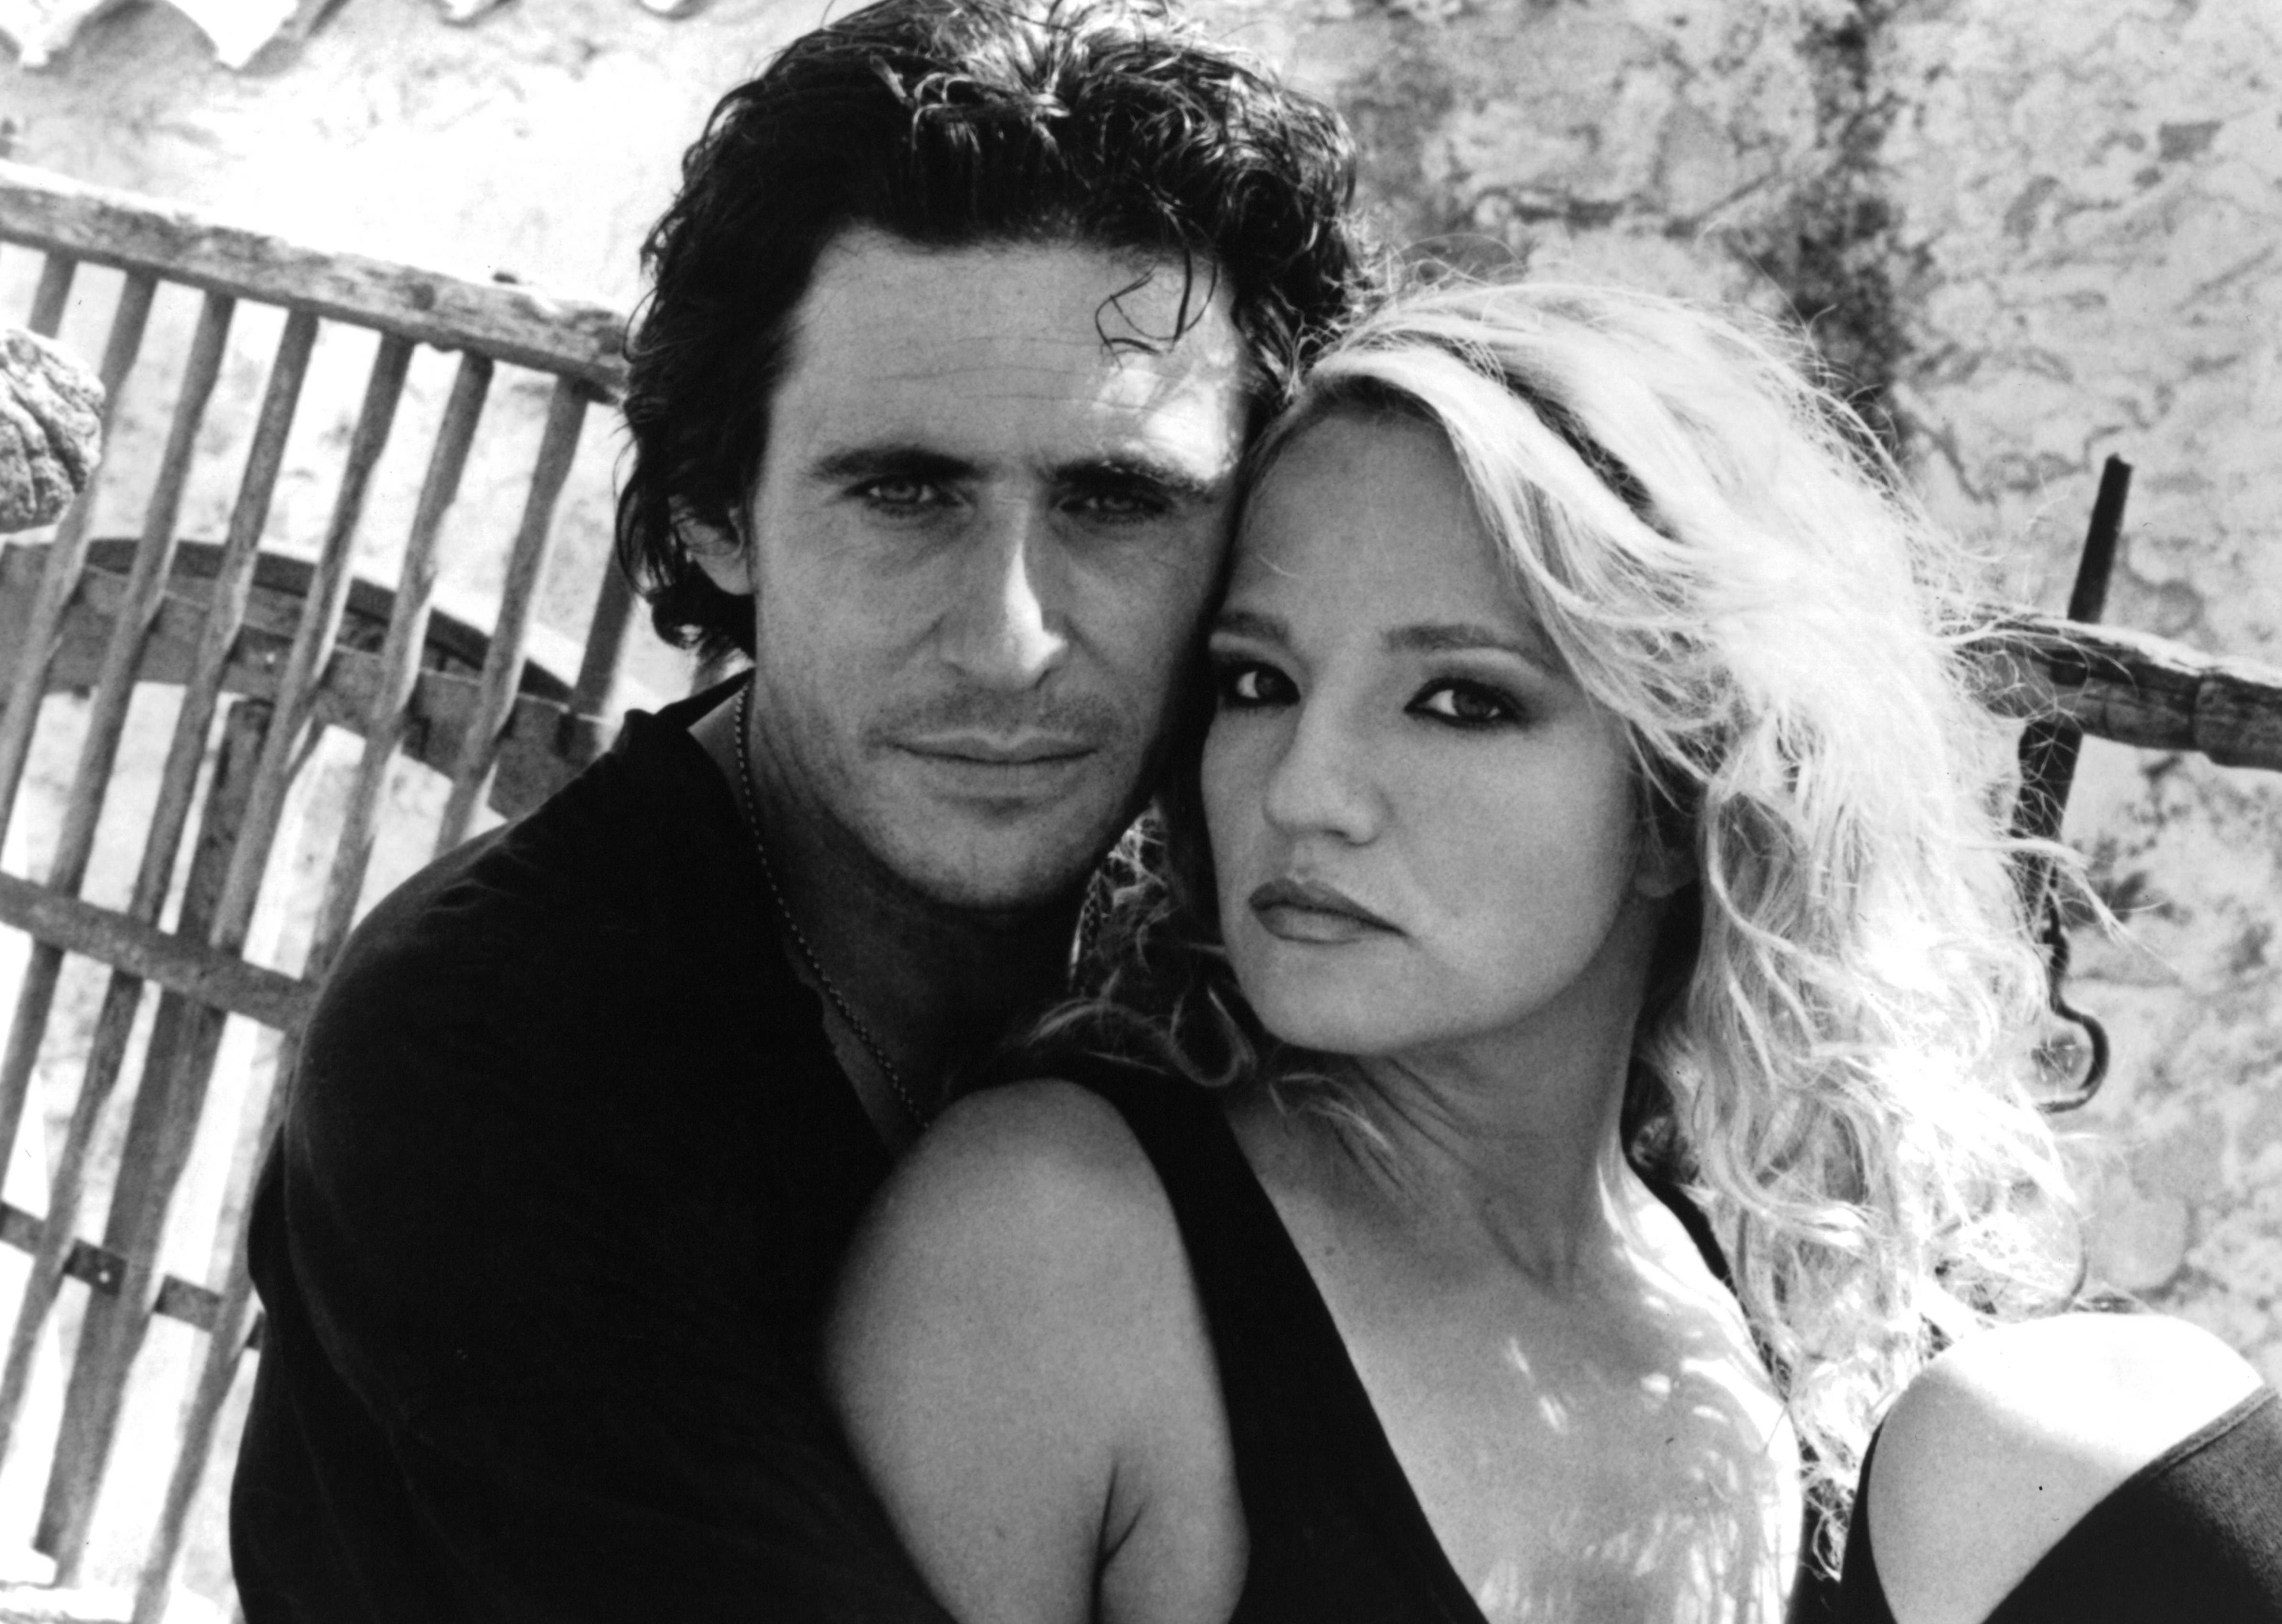 Actor Gabriel Byrne and actress Ellen Barkin on set of the movie "Siesta" circa 1987. | Source: Getty Images